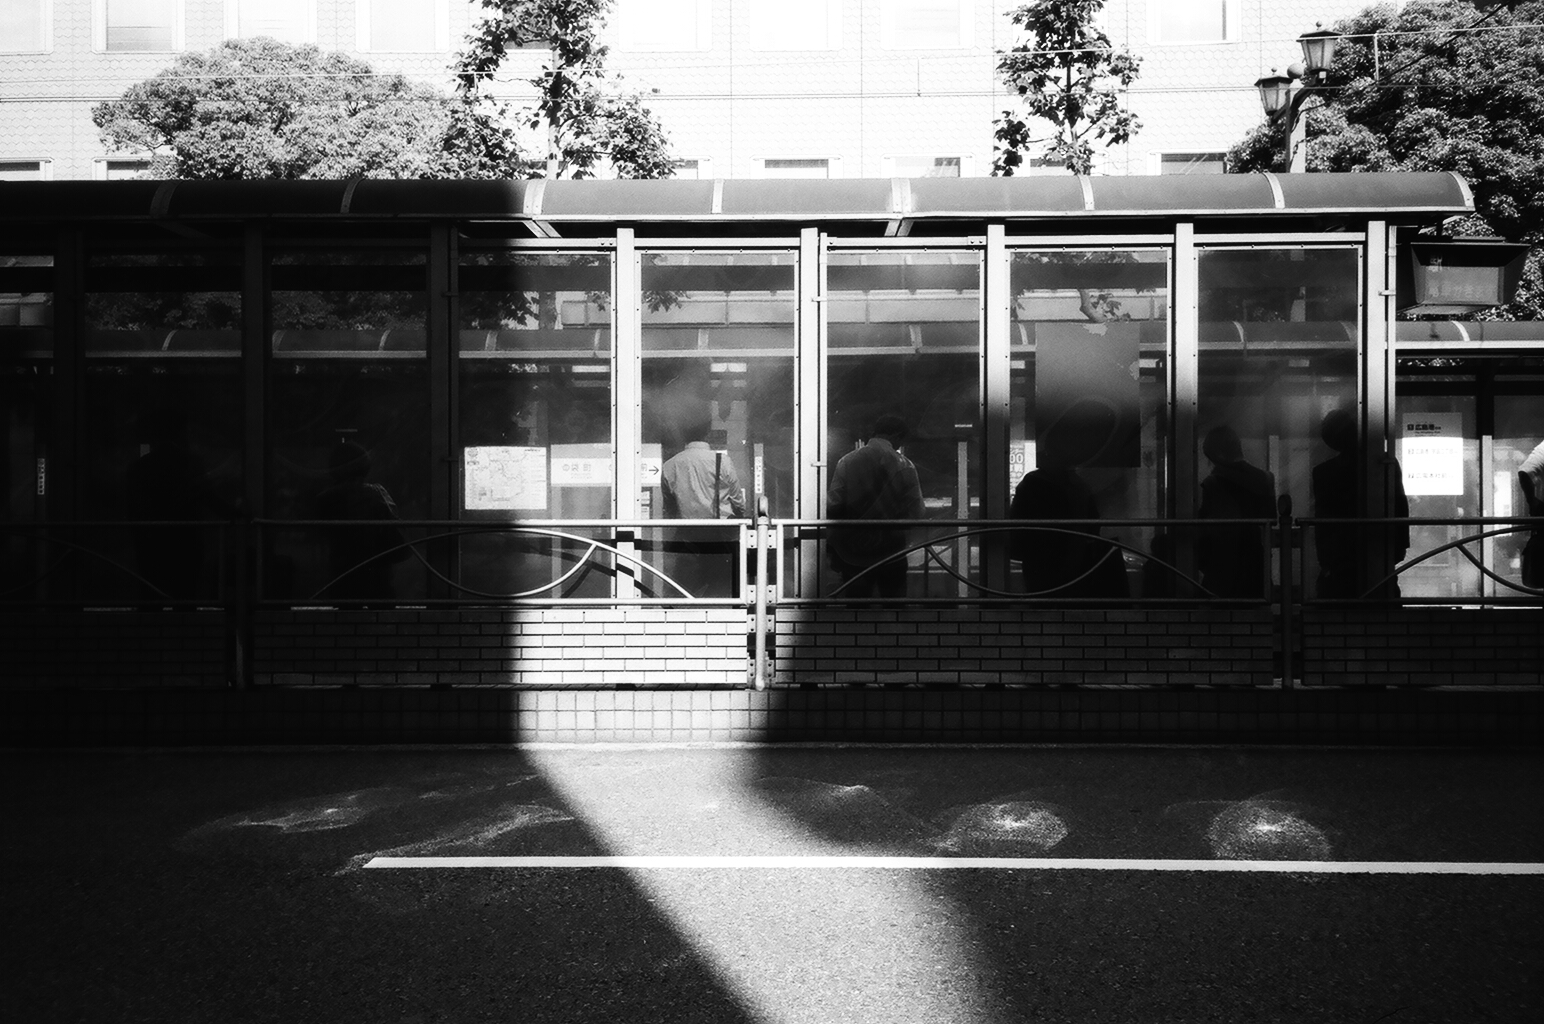  Sunlight dances through the panes of glass&nbsp;at a streetcar stop in central Hiroshima. The city has one of the most extensive networks of streetcars in Japan. Two Hiroden streetcars that survived WWII are still in operation today. 